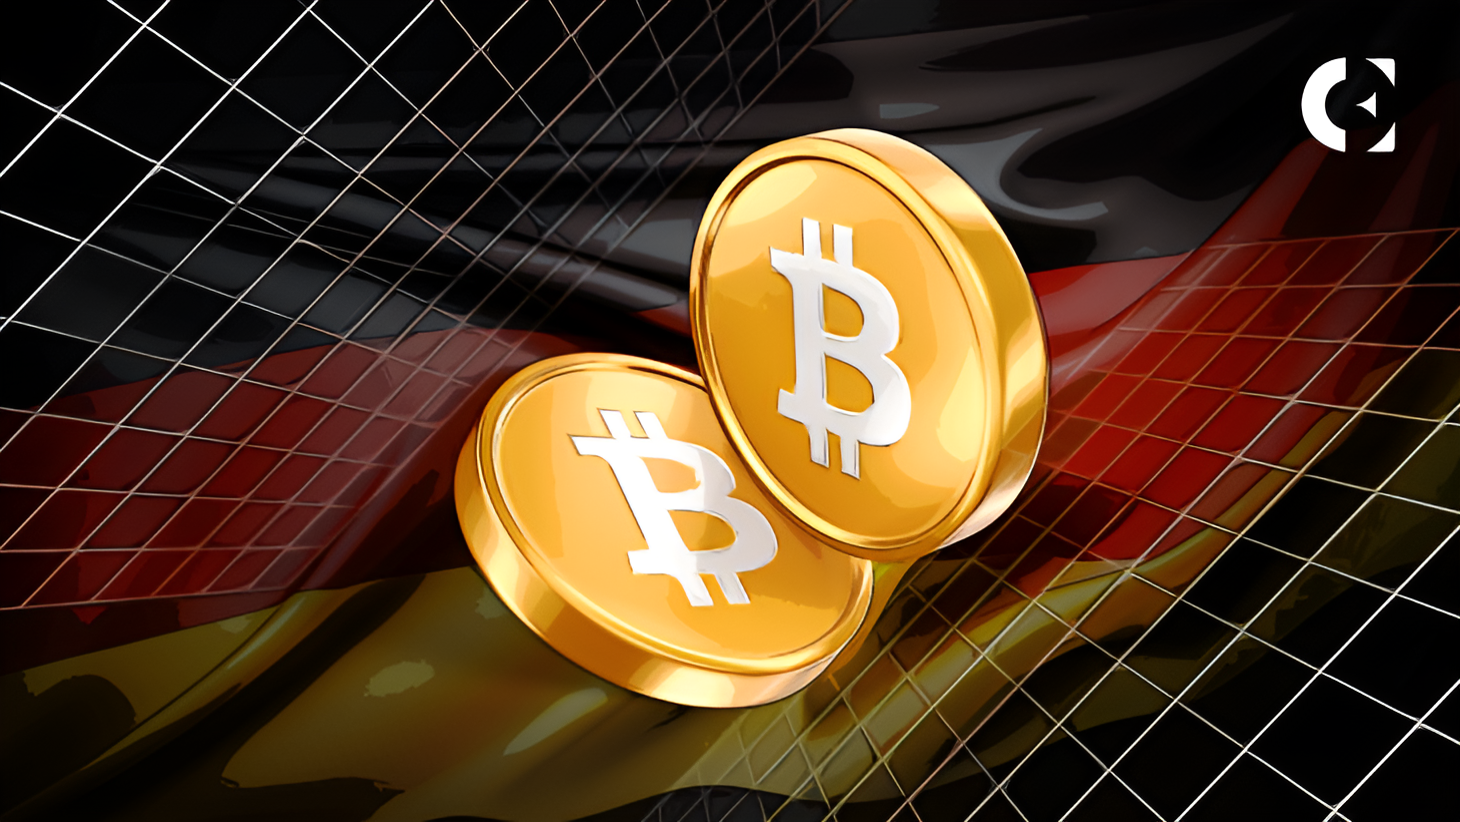 German Government Shifts $24 Million in Bitcoin as Crypto Market Fluctuates